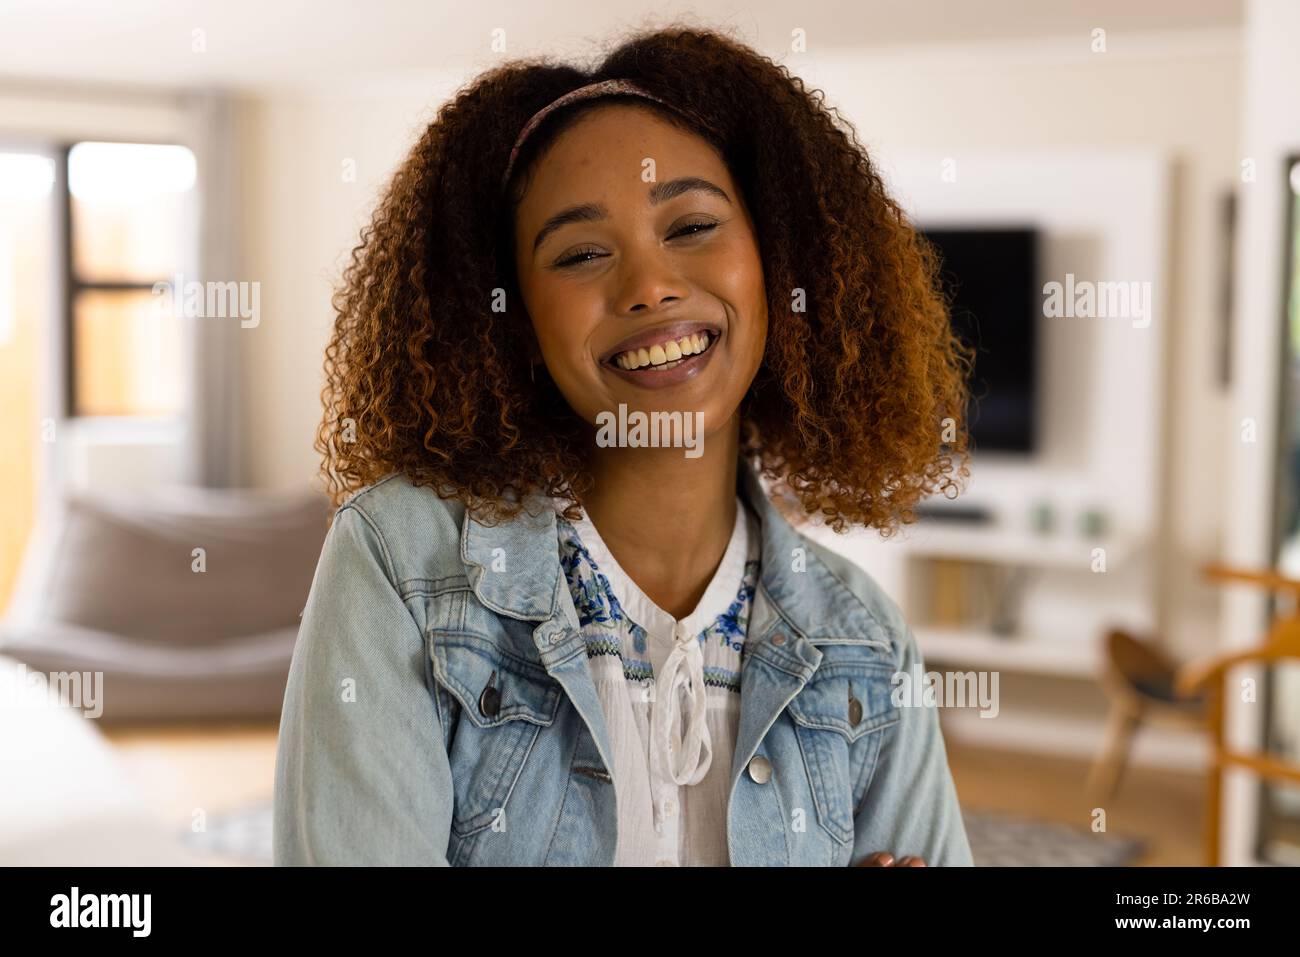 Portrait of happy biracial woman with curly hair smiling to camera at home Stock Photo